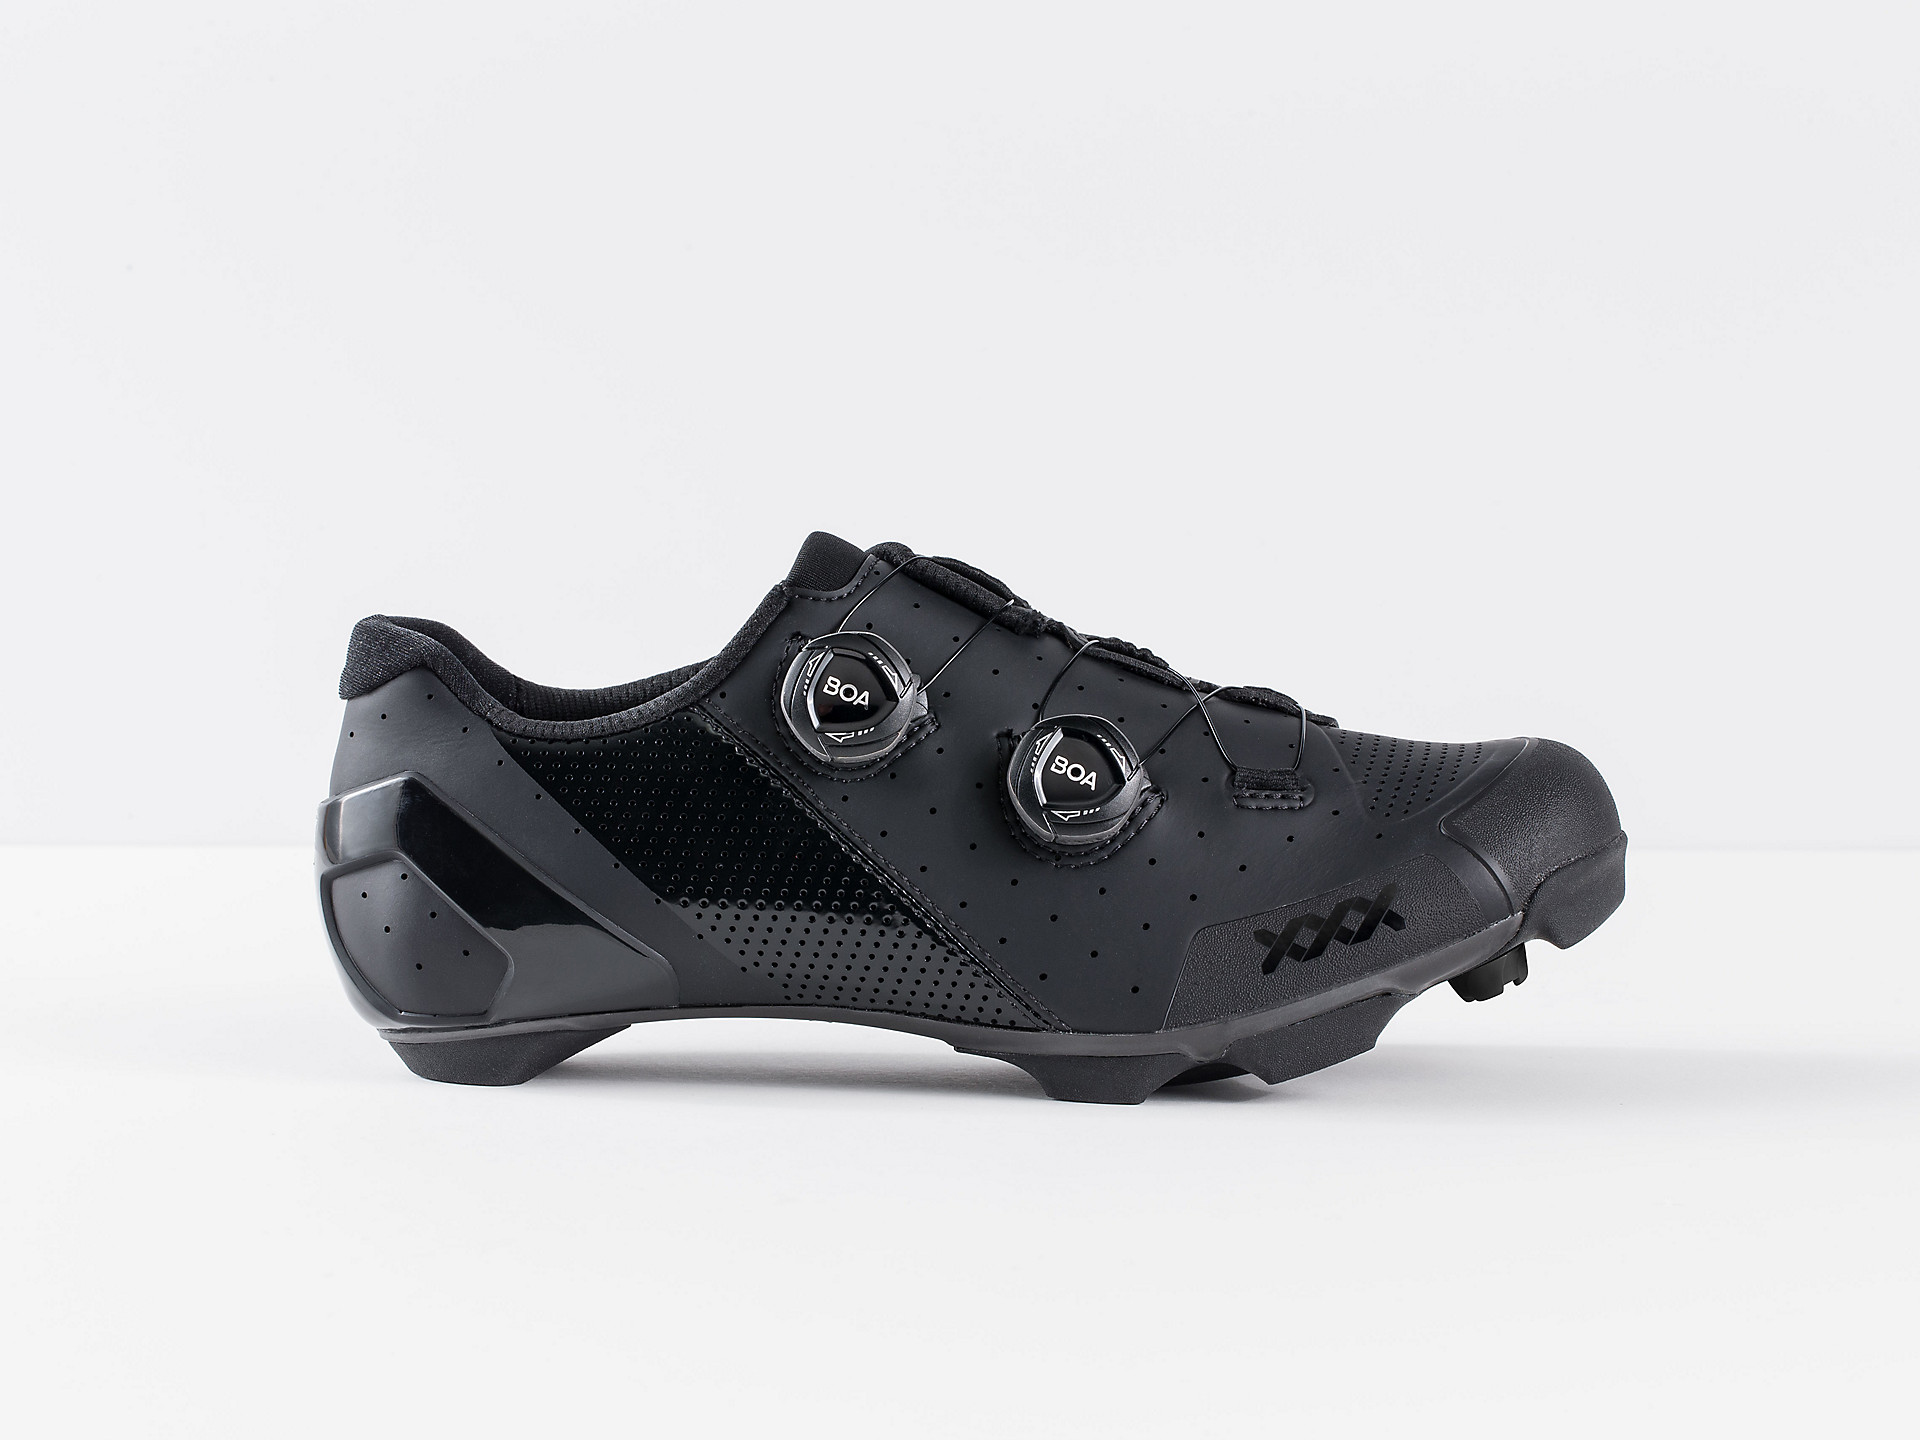 <a href="https://cycles-clement.be/product/chaussures-bont-xxx-mtb-45-black/">CHAUSSURES BONT XXX MTB 45 BLACK</a>